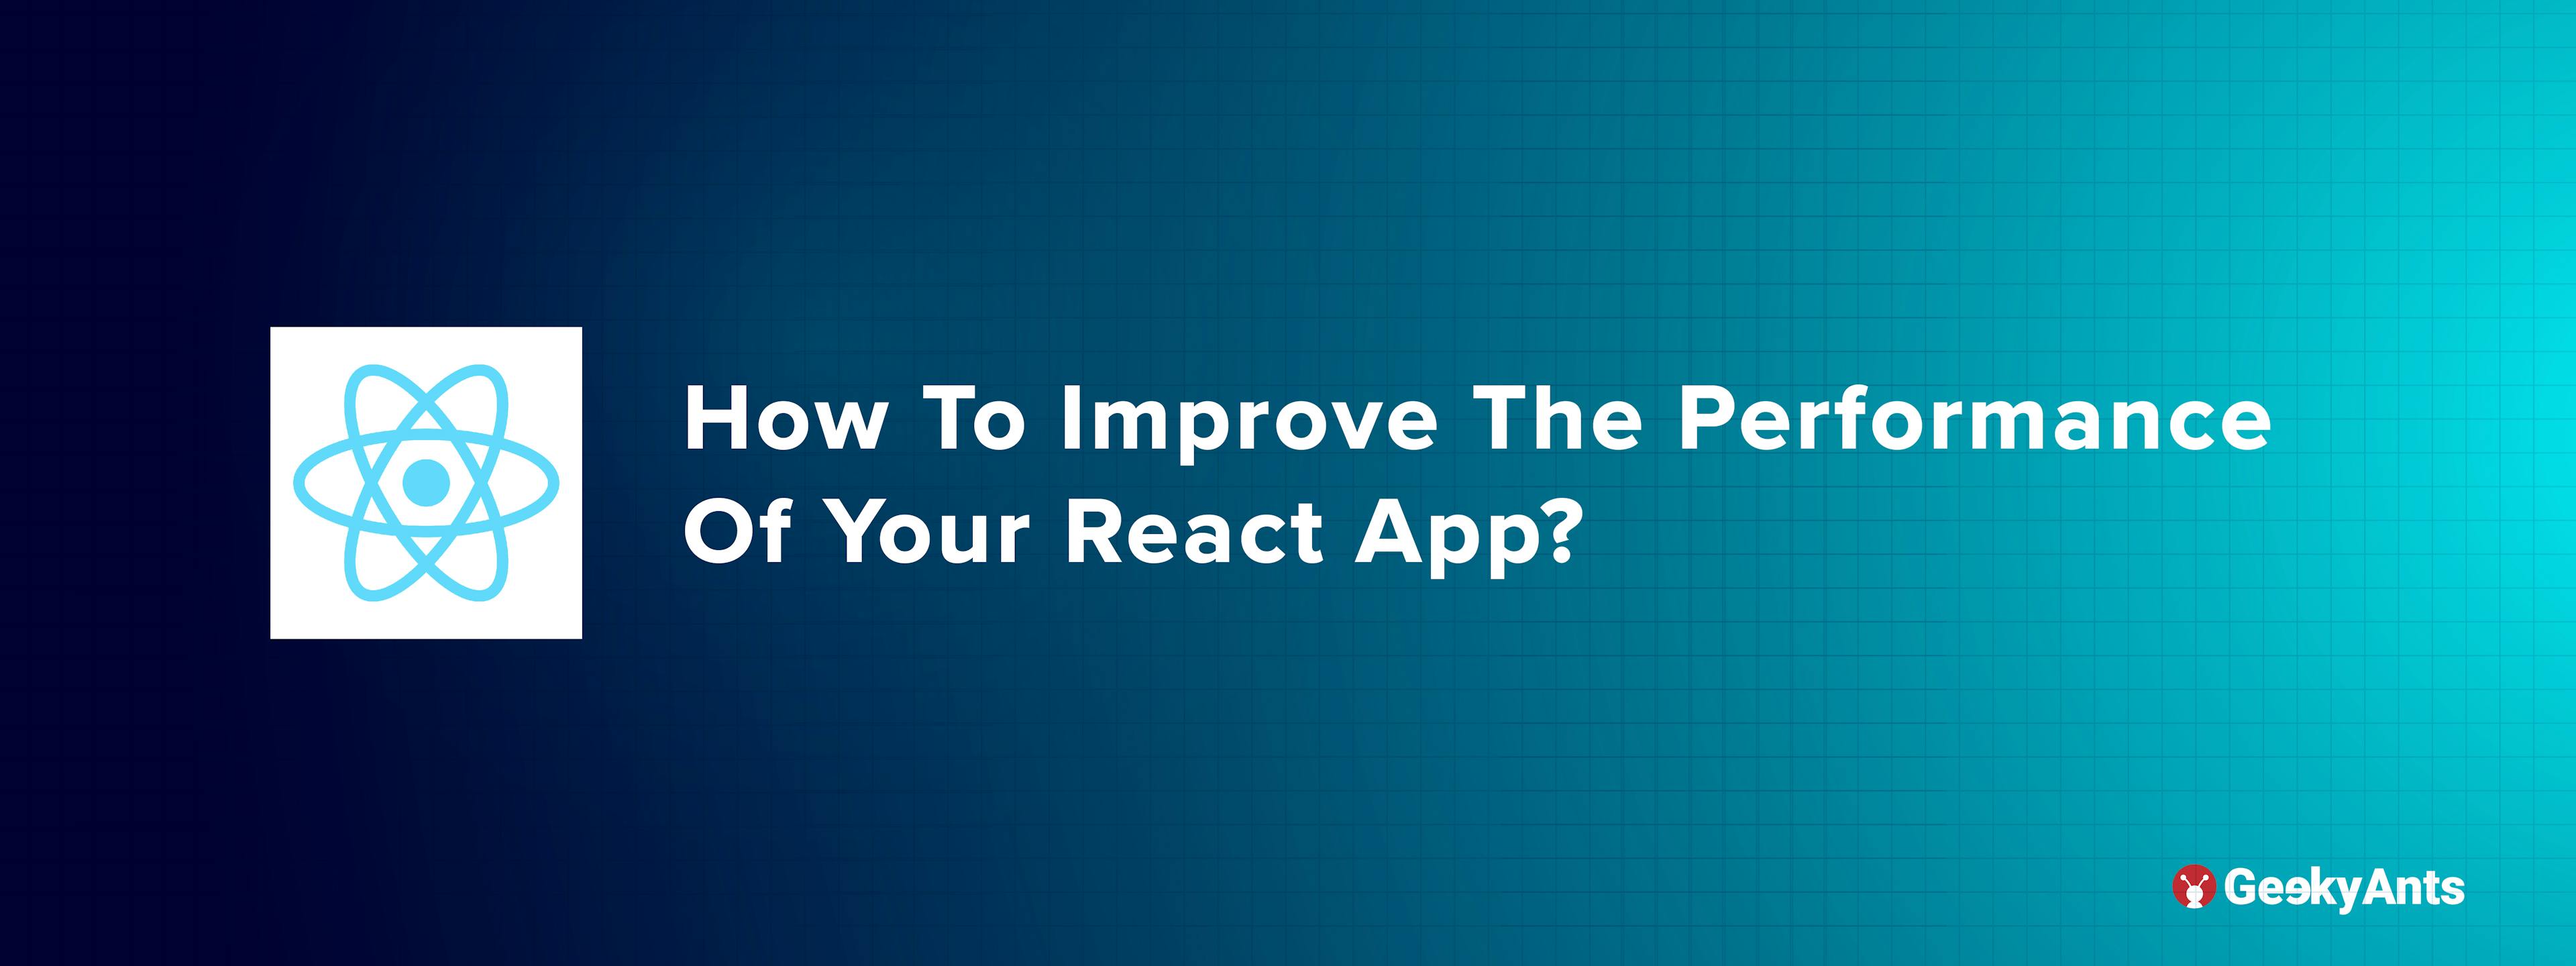 How To Improve The Performance Of Your React App?